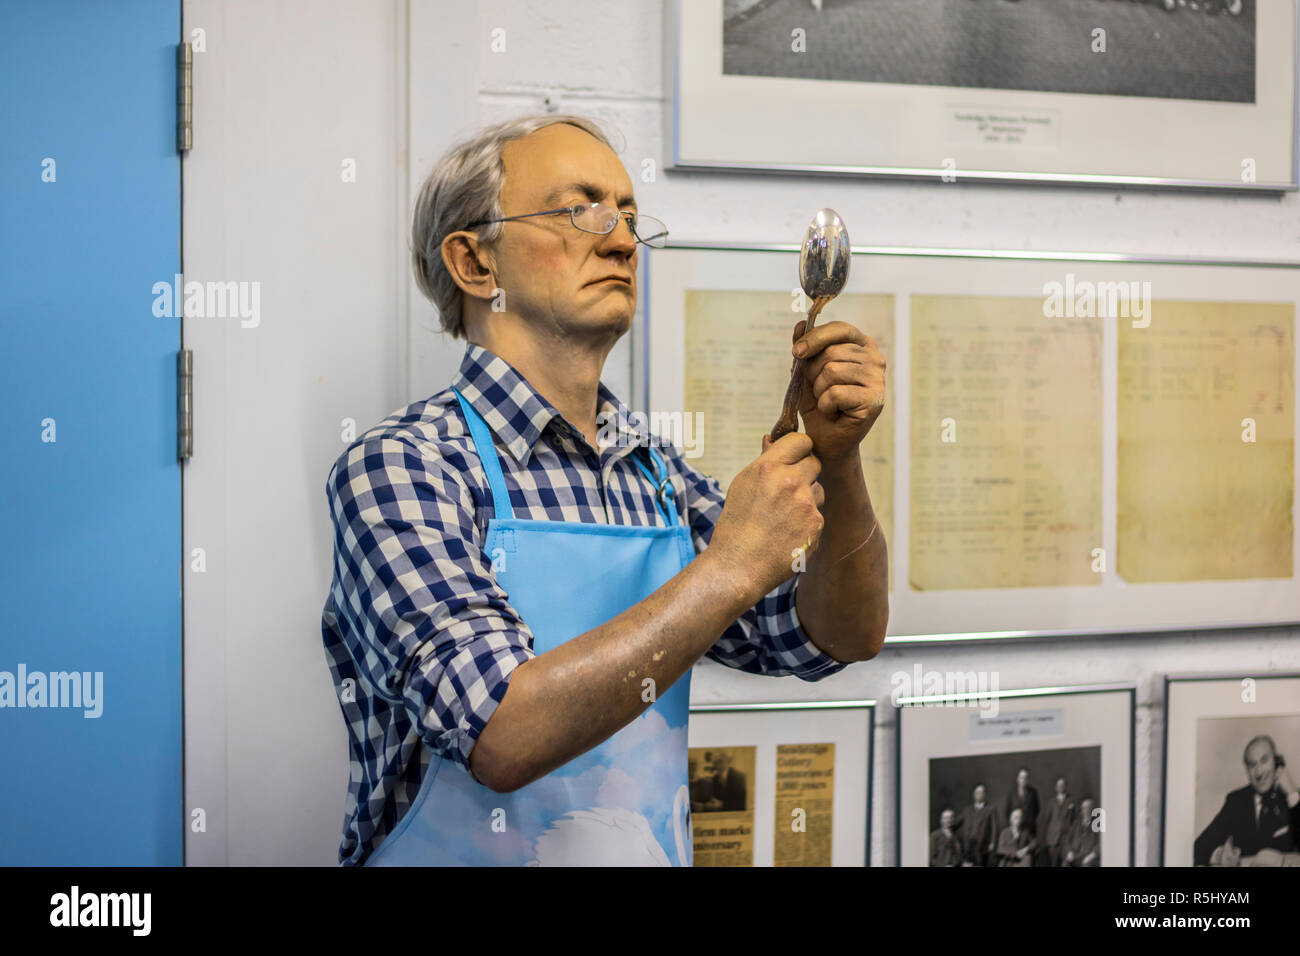 wax statue of a silversmith inspecting, holding a spoon, older man, factory worker, silversmith concept Stock Photo